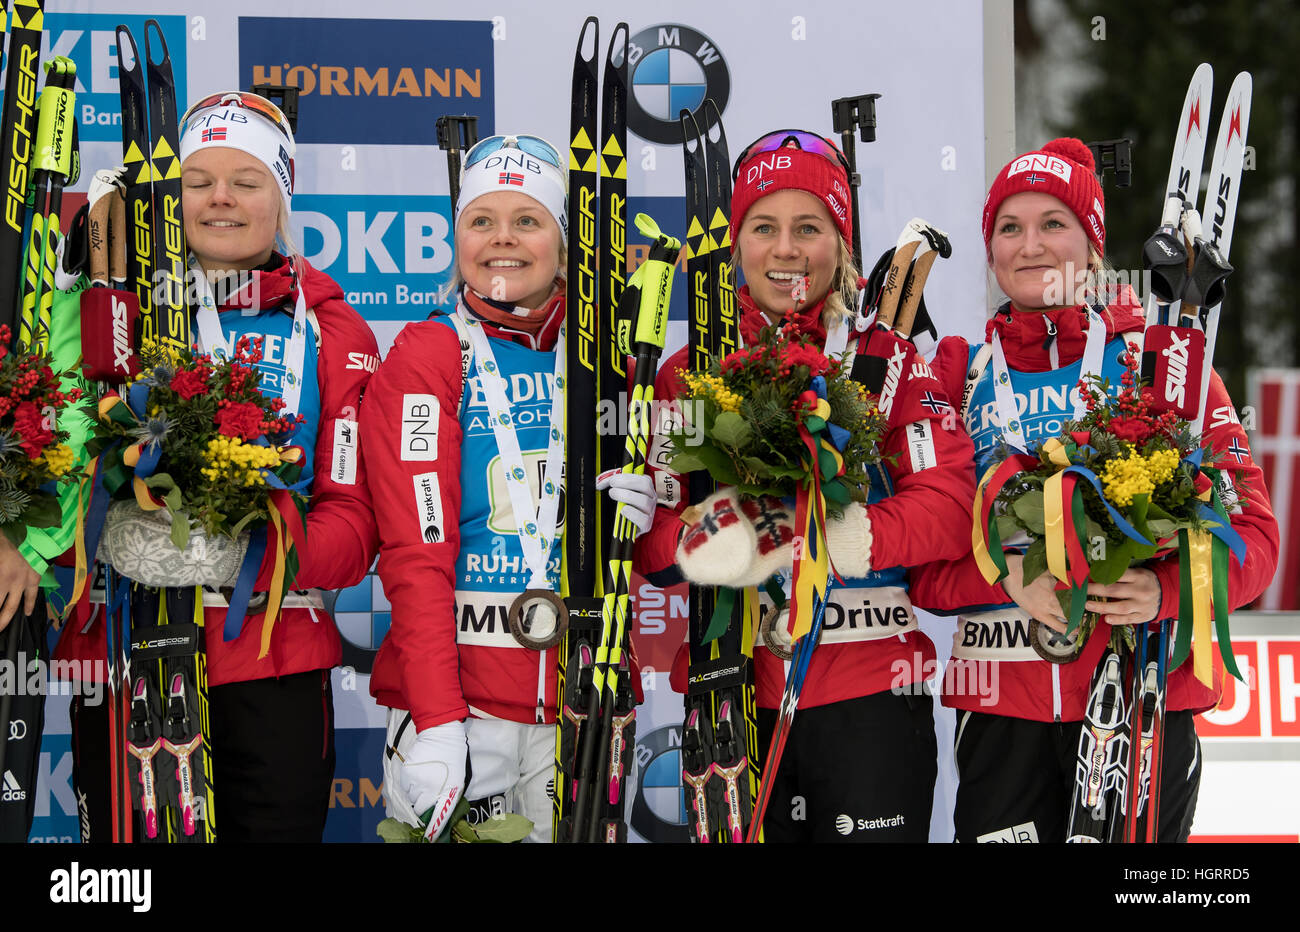 Ruhpolding, Germany. 12th Jan, 2017. L-R: Norwegian biathletes Kaia Woeien Nicolaisen, Hilde Fenne, Tiril Eckhoff and Marte Olsbu on the victors' podium after competing in the 4 x 6 kilometer women's relay race at the Biathlon World Cup in the Chiemgau Arena in Ruhpolding, Germany, 12 January 2017. Germany finished in first place ahead of France and Norway. Photo: Matthias Balk/dpa/Alamy Live News Stock Photo